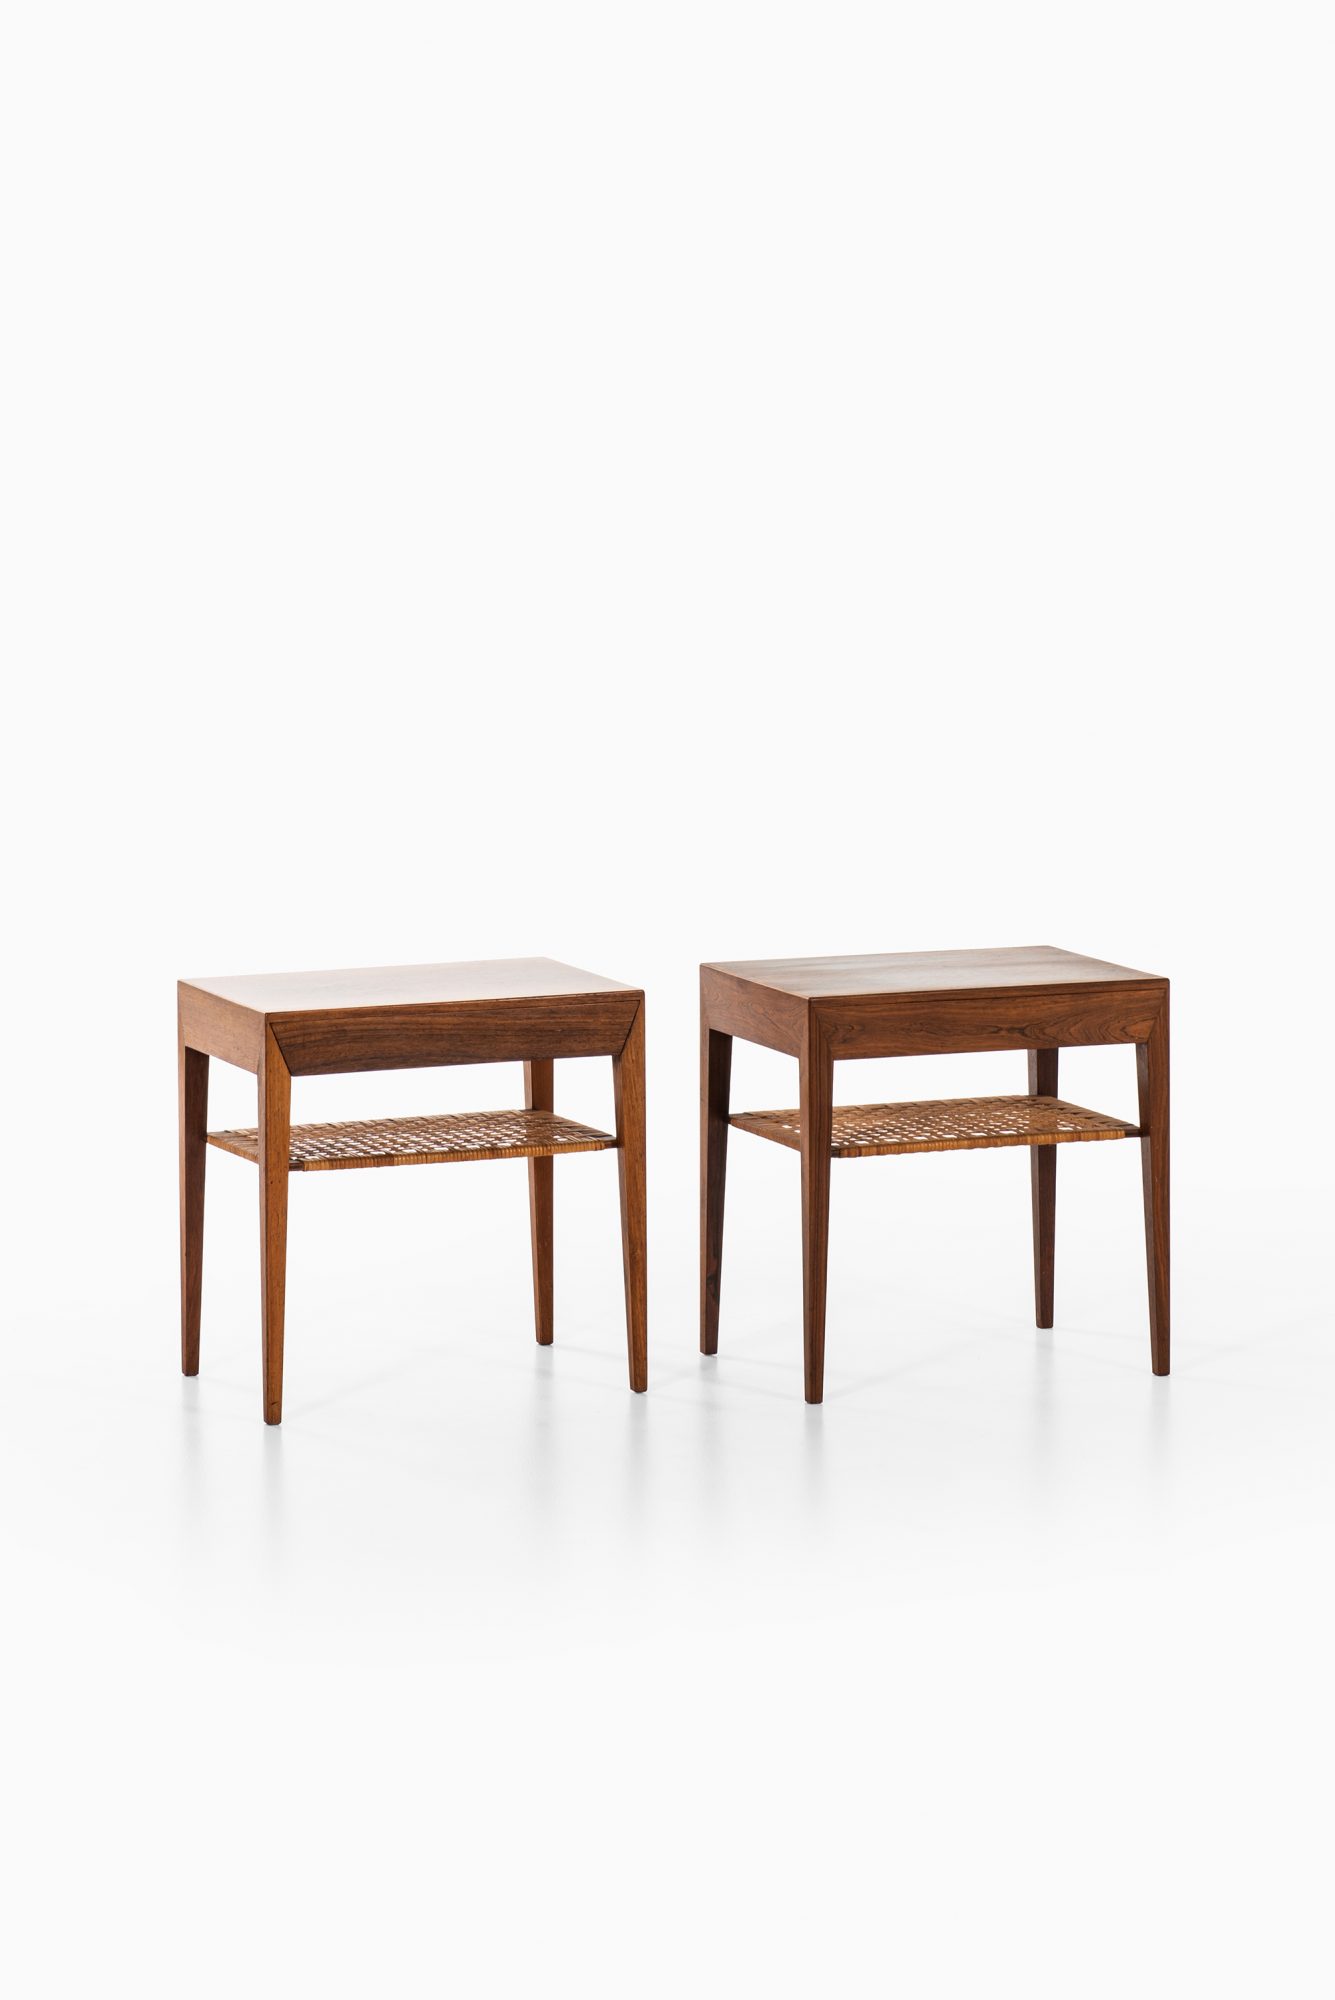 Severin Hansen bedside tables in rosewood and cane at Studio Schalling